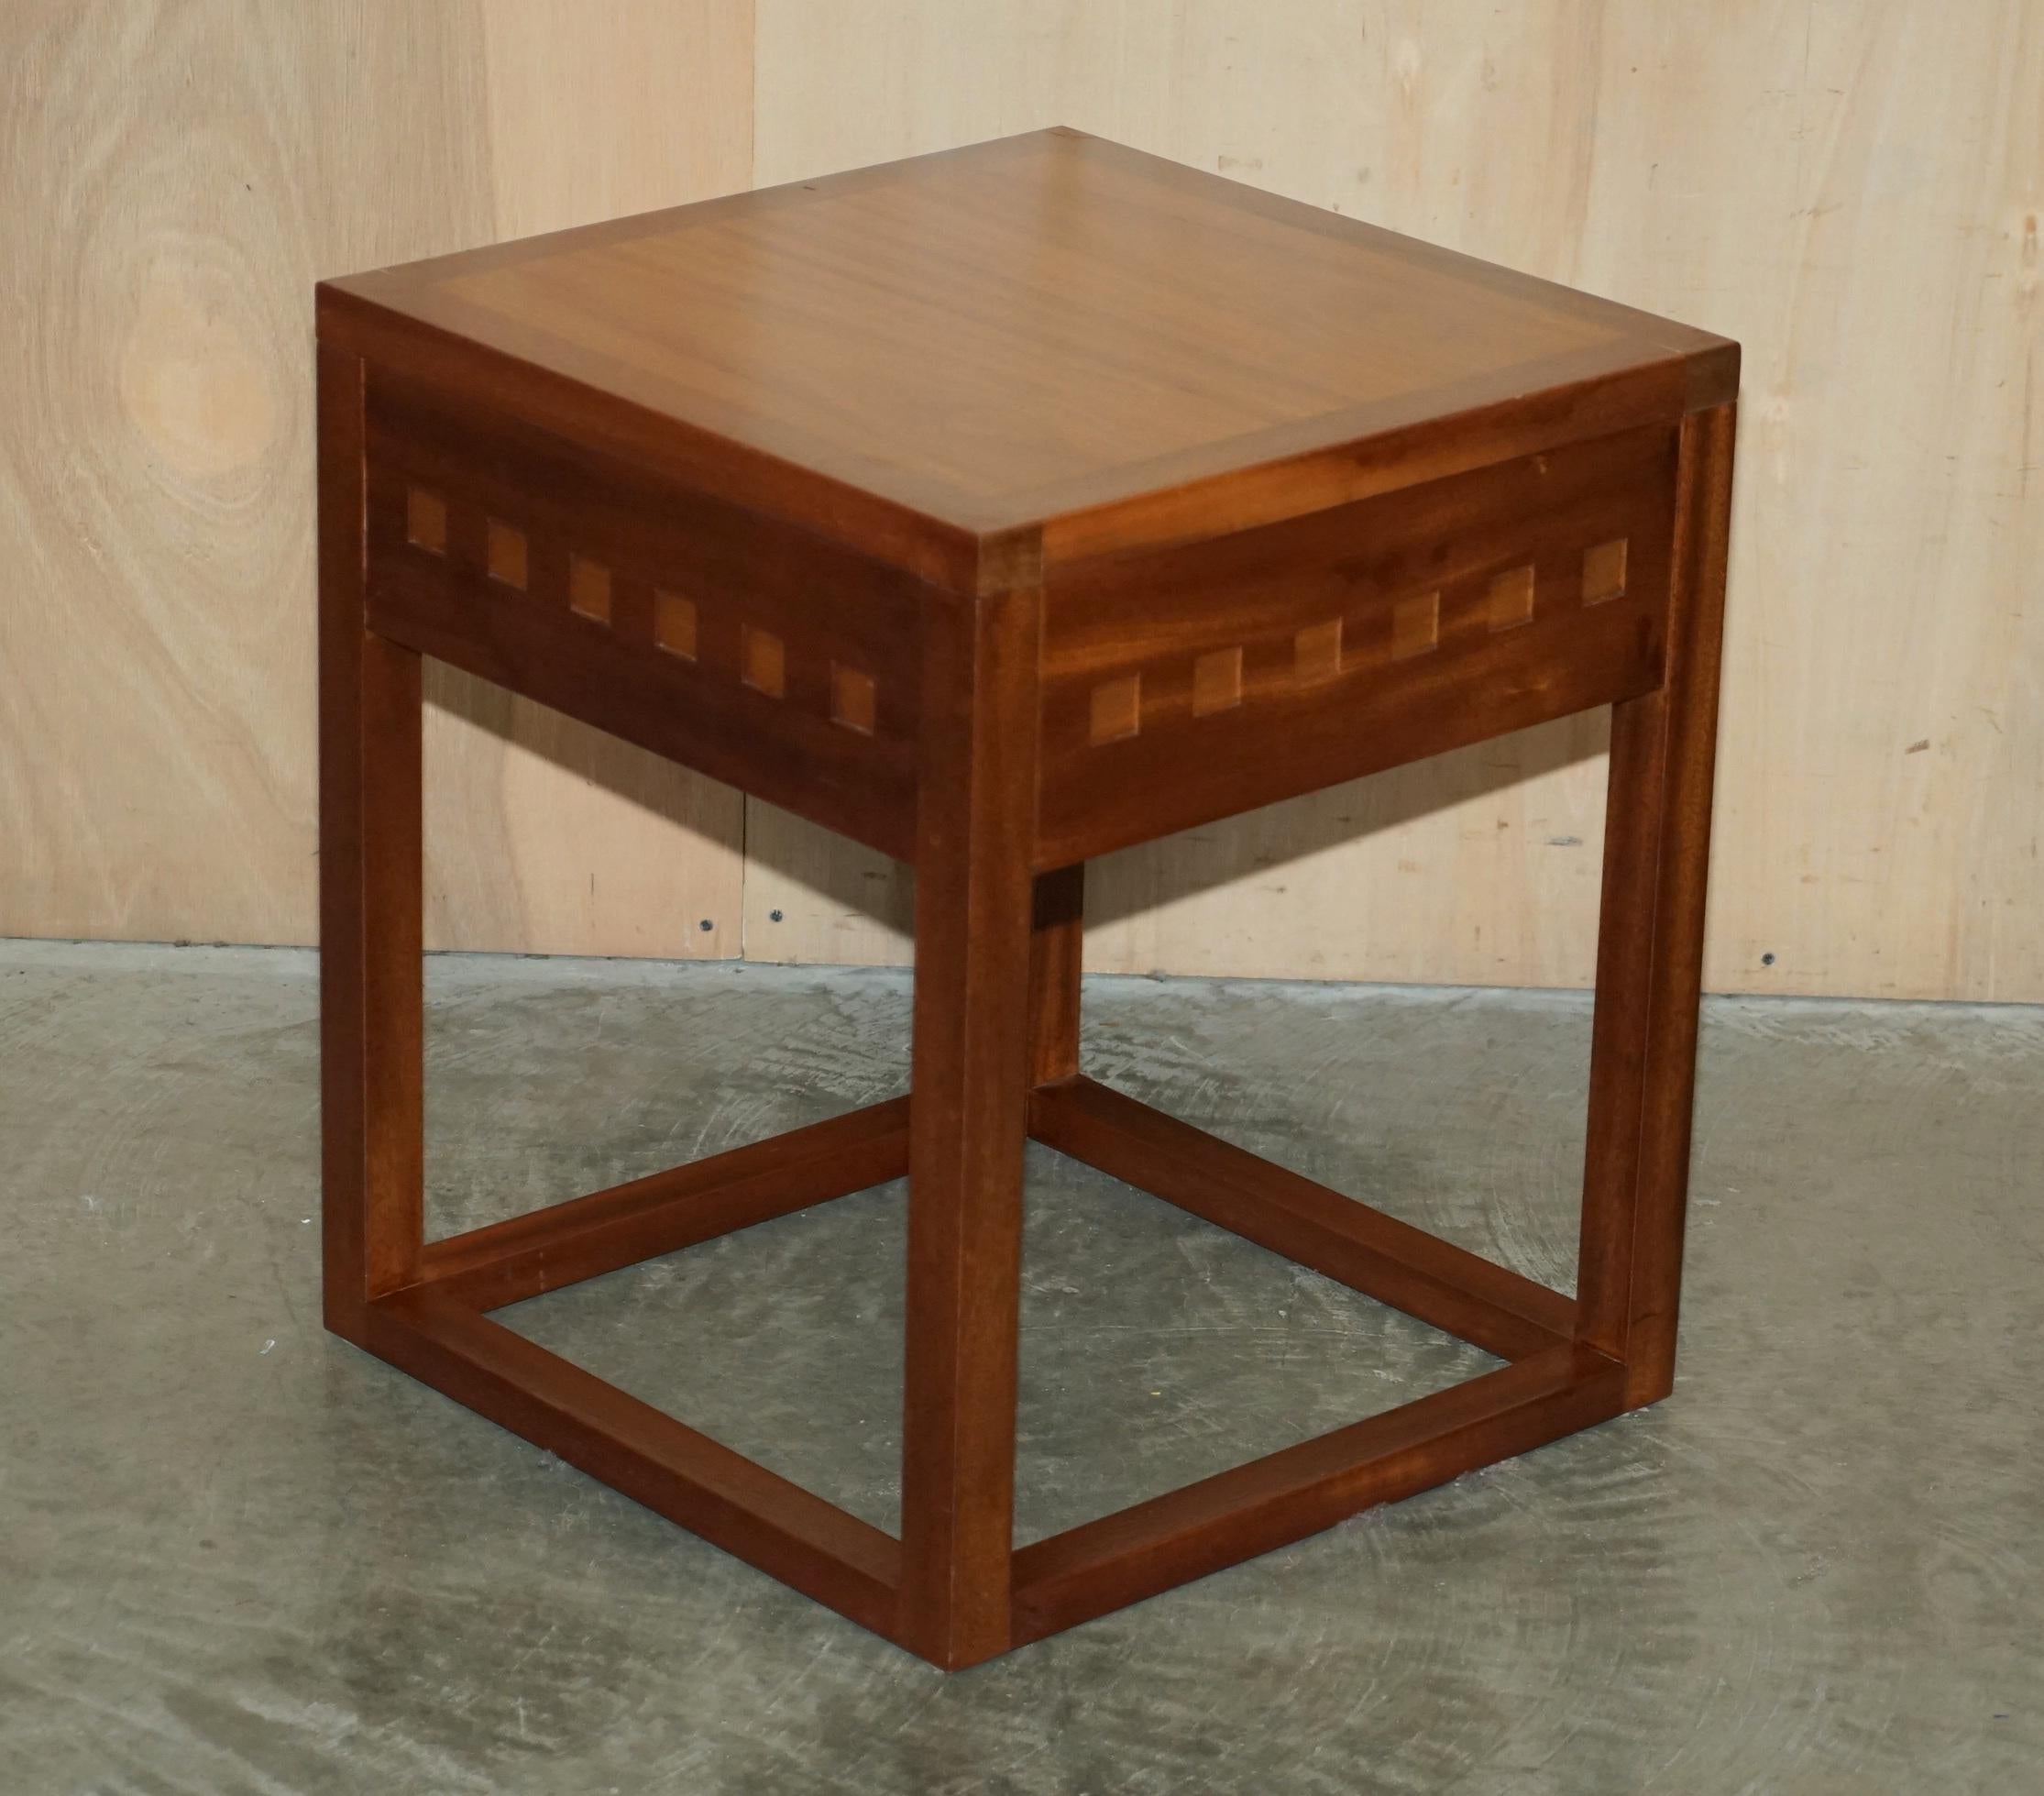 We are delighted to offer for sale this lovely pair of Cherry wood and teak side tables which are part of a set.

These are very well made and good-looking,the teak and cherry give them a nice natural feel.

The condition is very good, we have